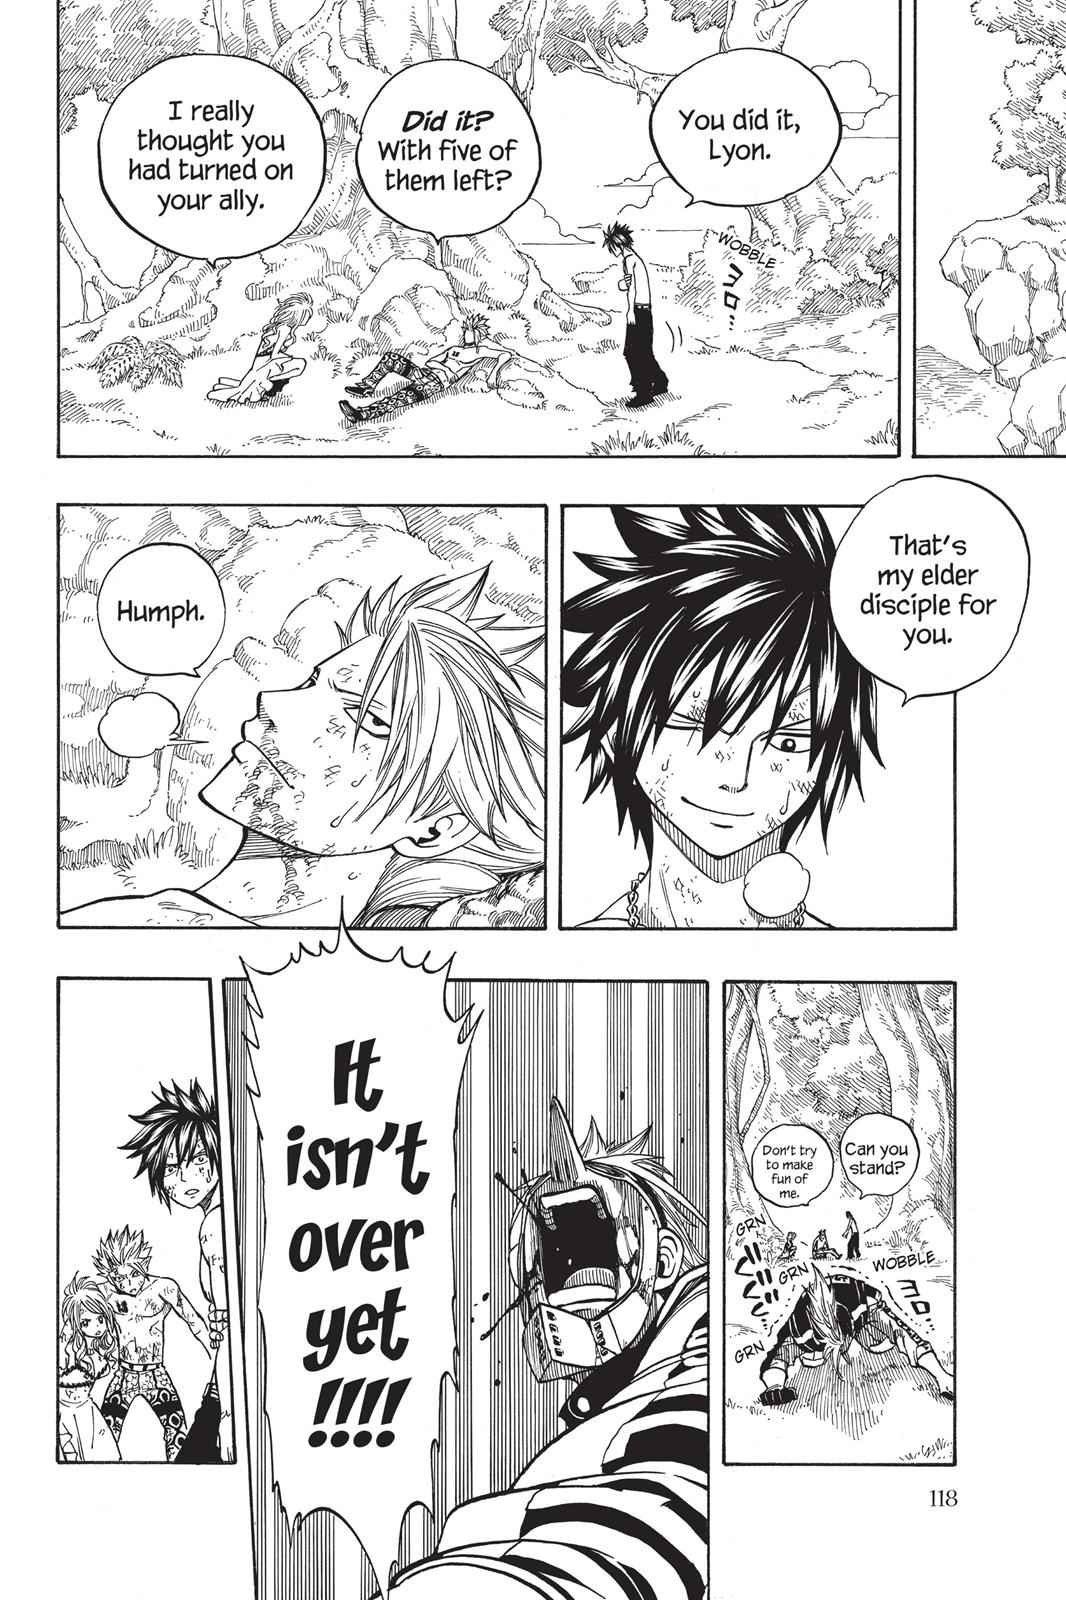  Chapter 140 image 015